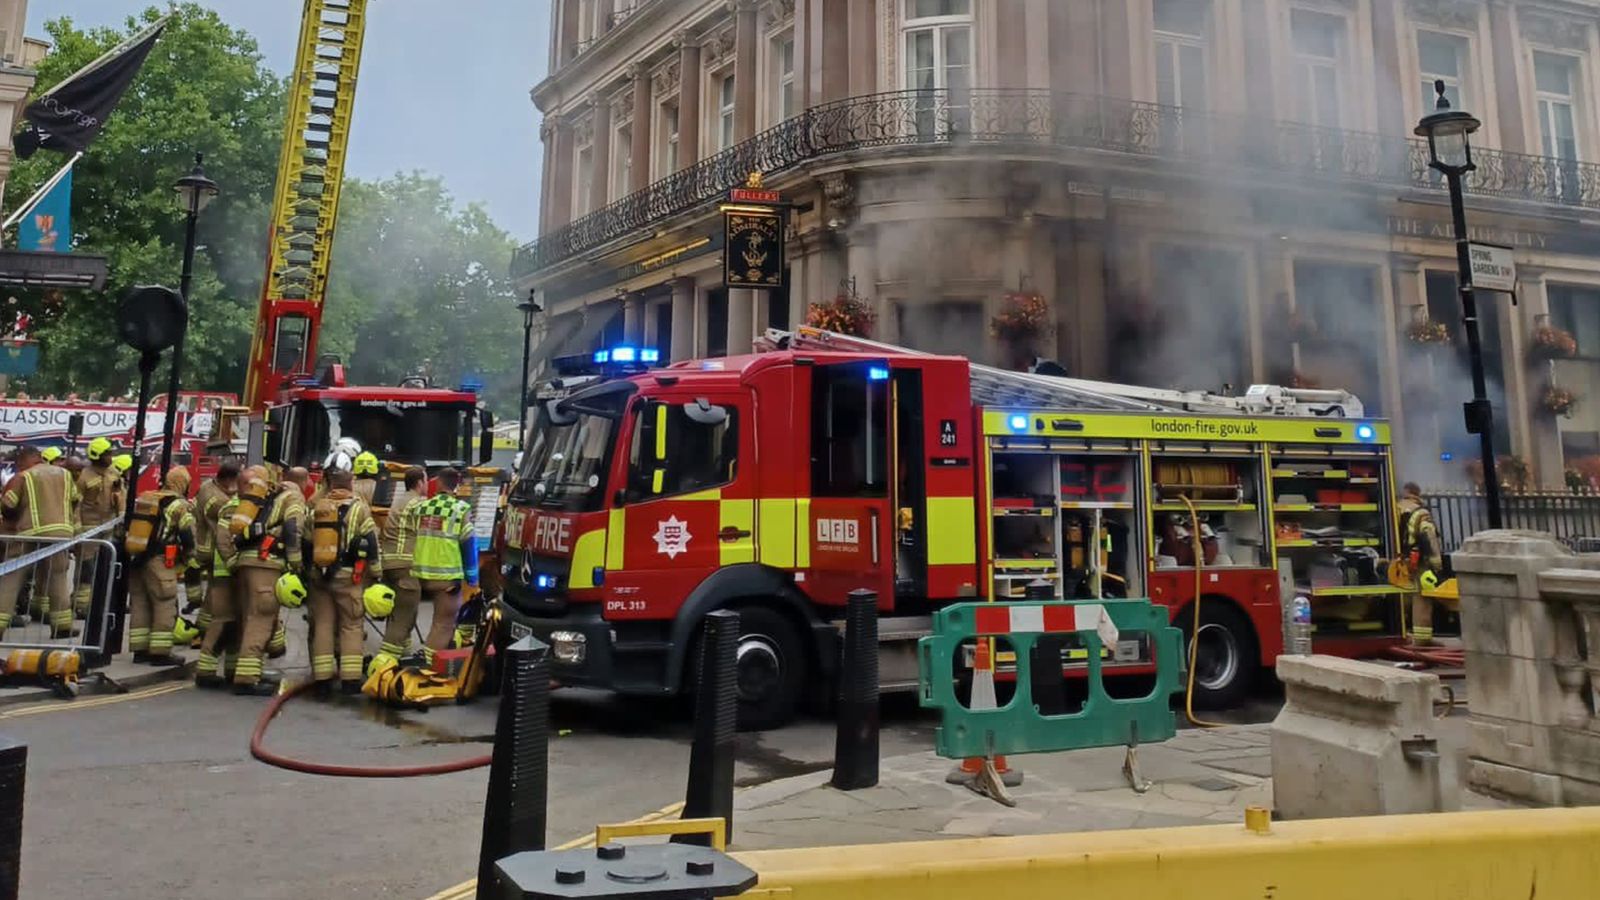 London Fire Brigade is 'institutionally misogynist and racist', damning review finds